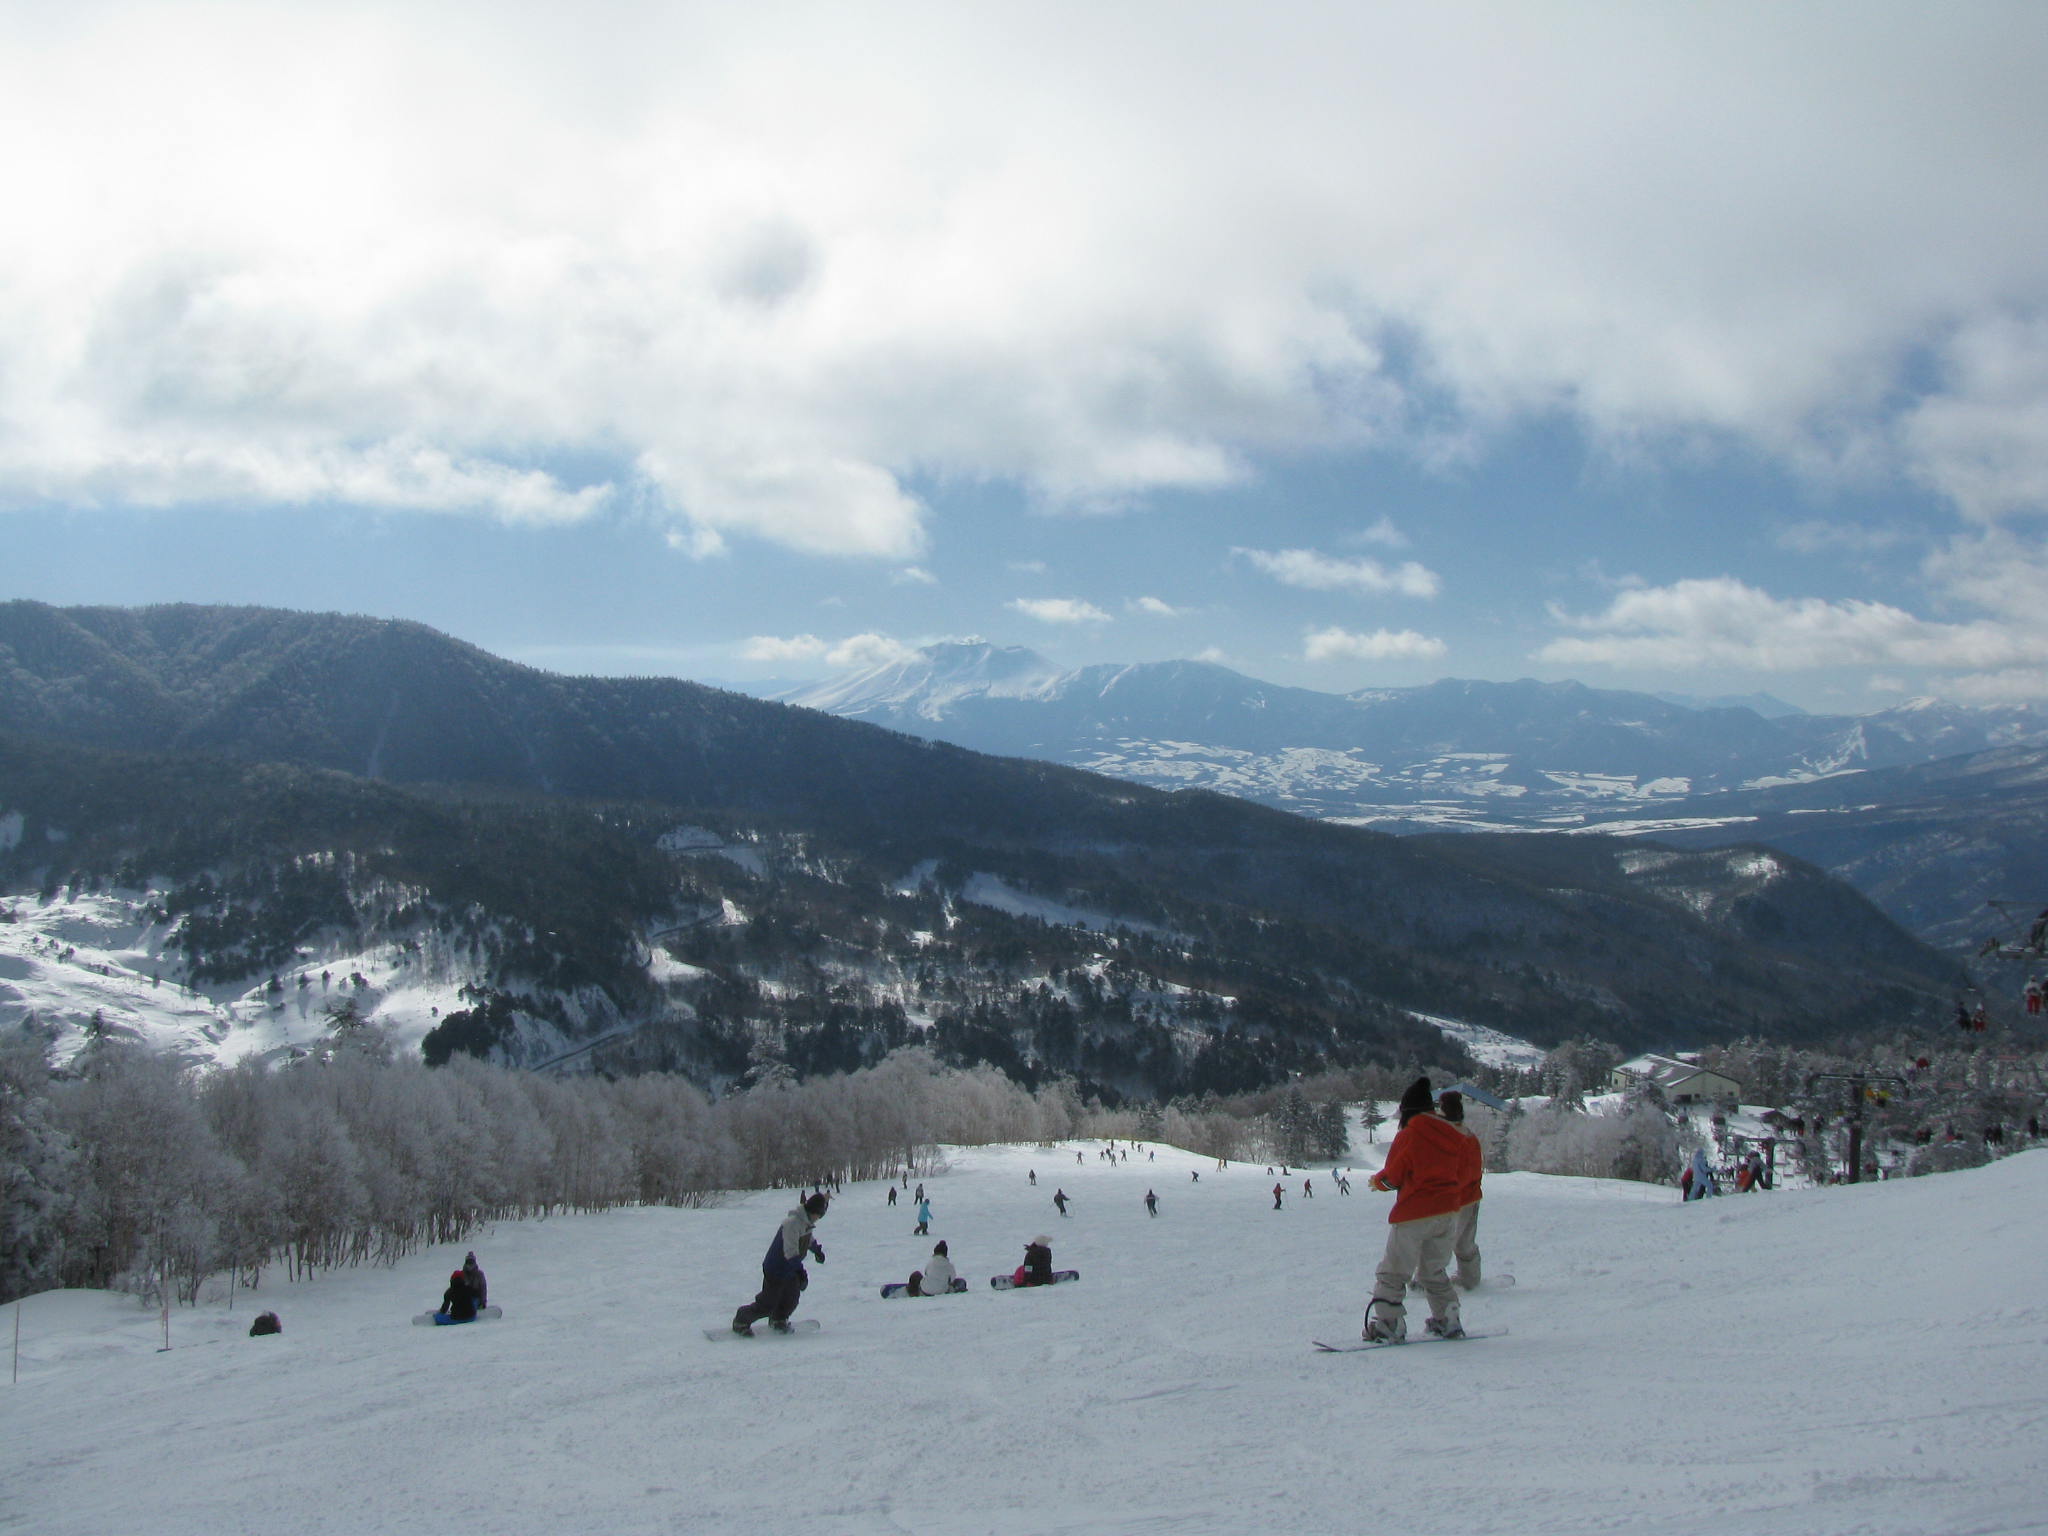 Cheap Ski Trip Tokyo Great Cycling Tour Staff Blog intended for How To Ski Cheap In Japan